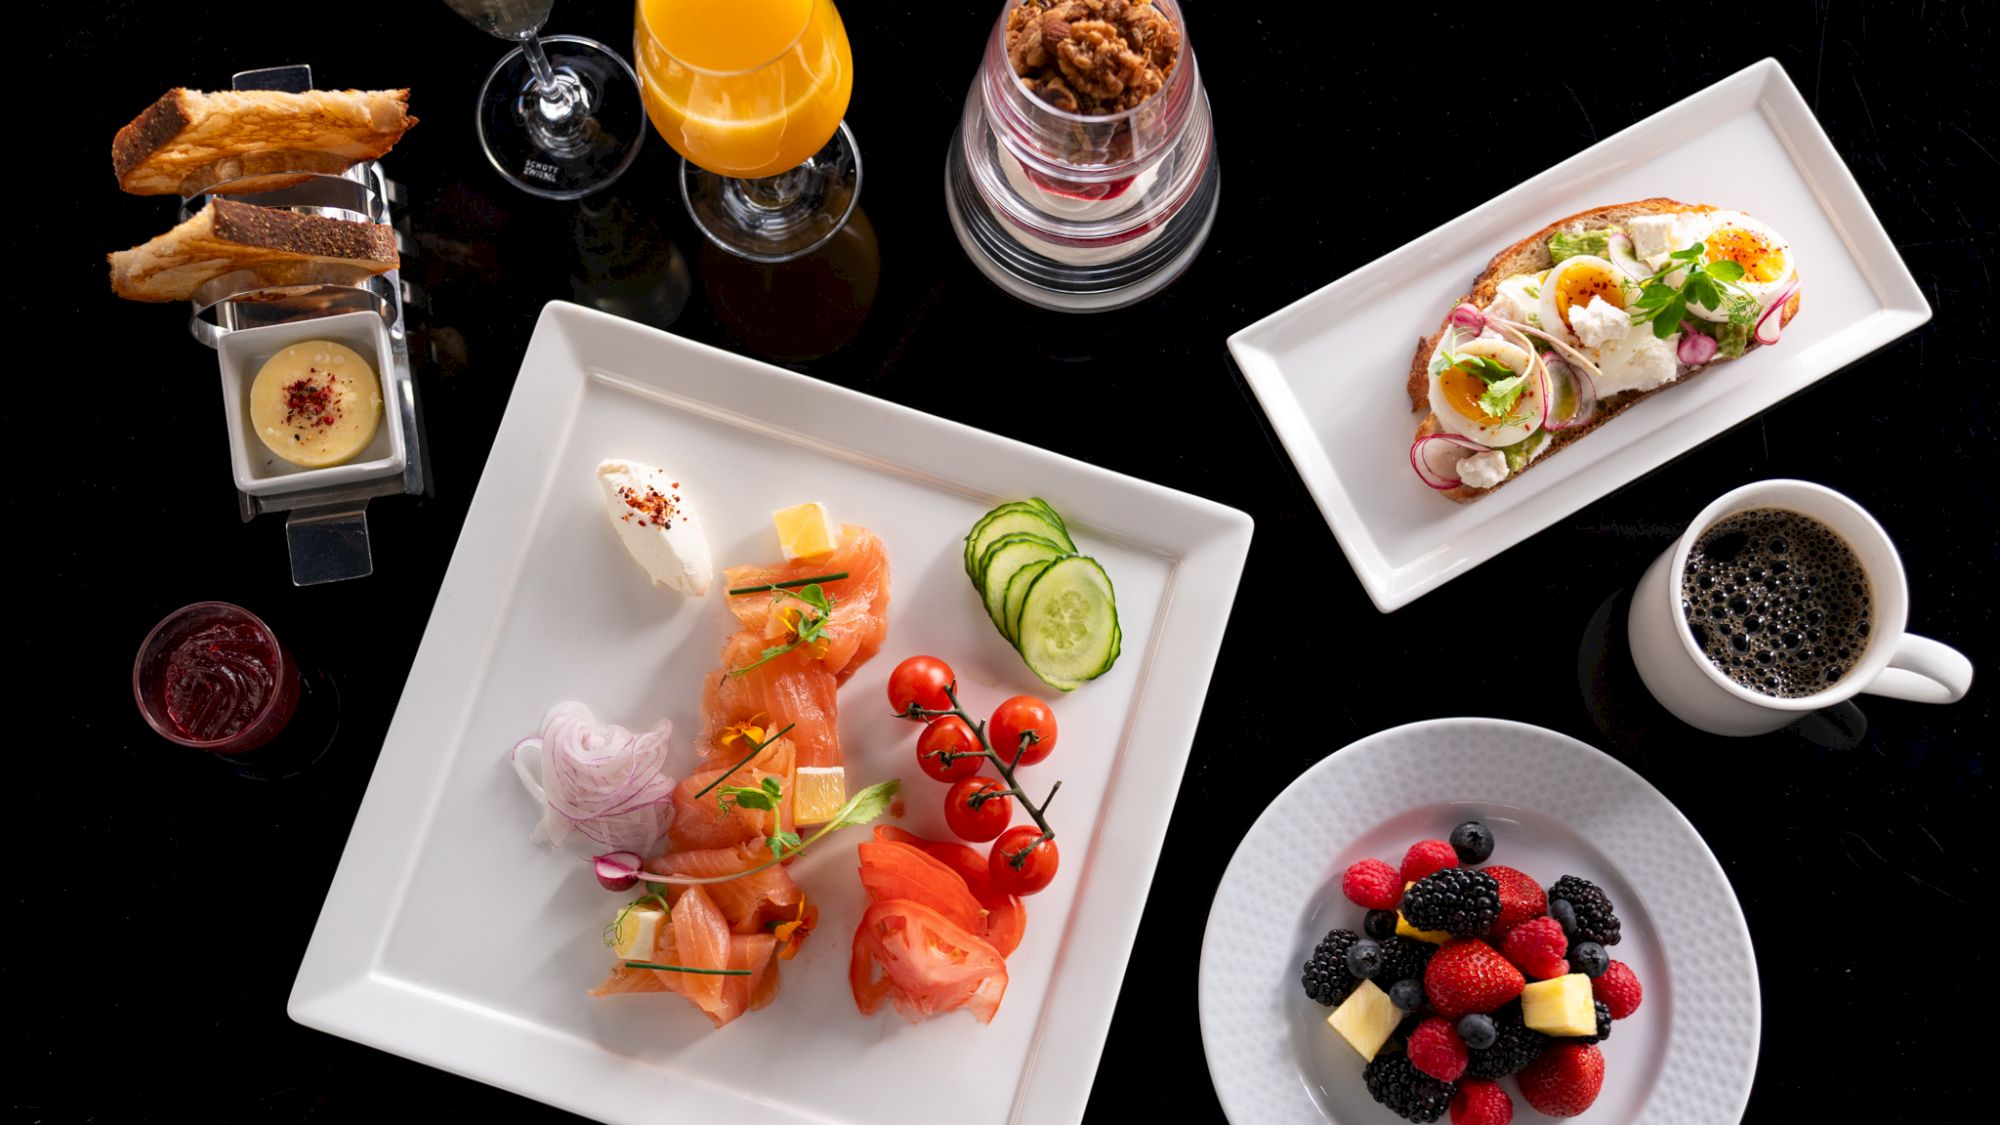 Elegant breakfast spread with smoked salmon, bagels, fruits, pastries.